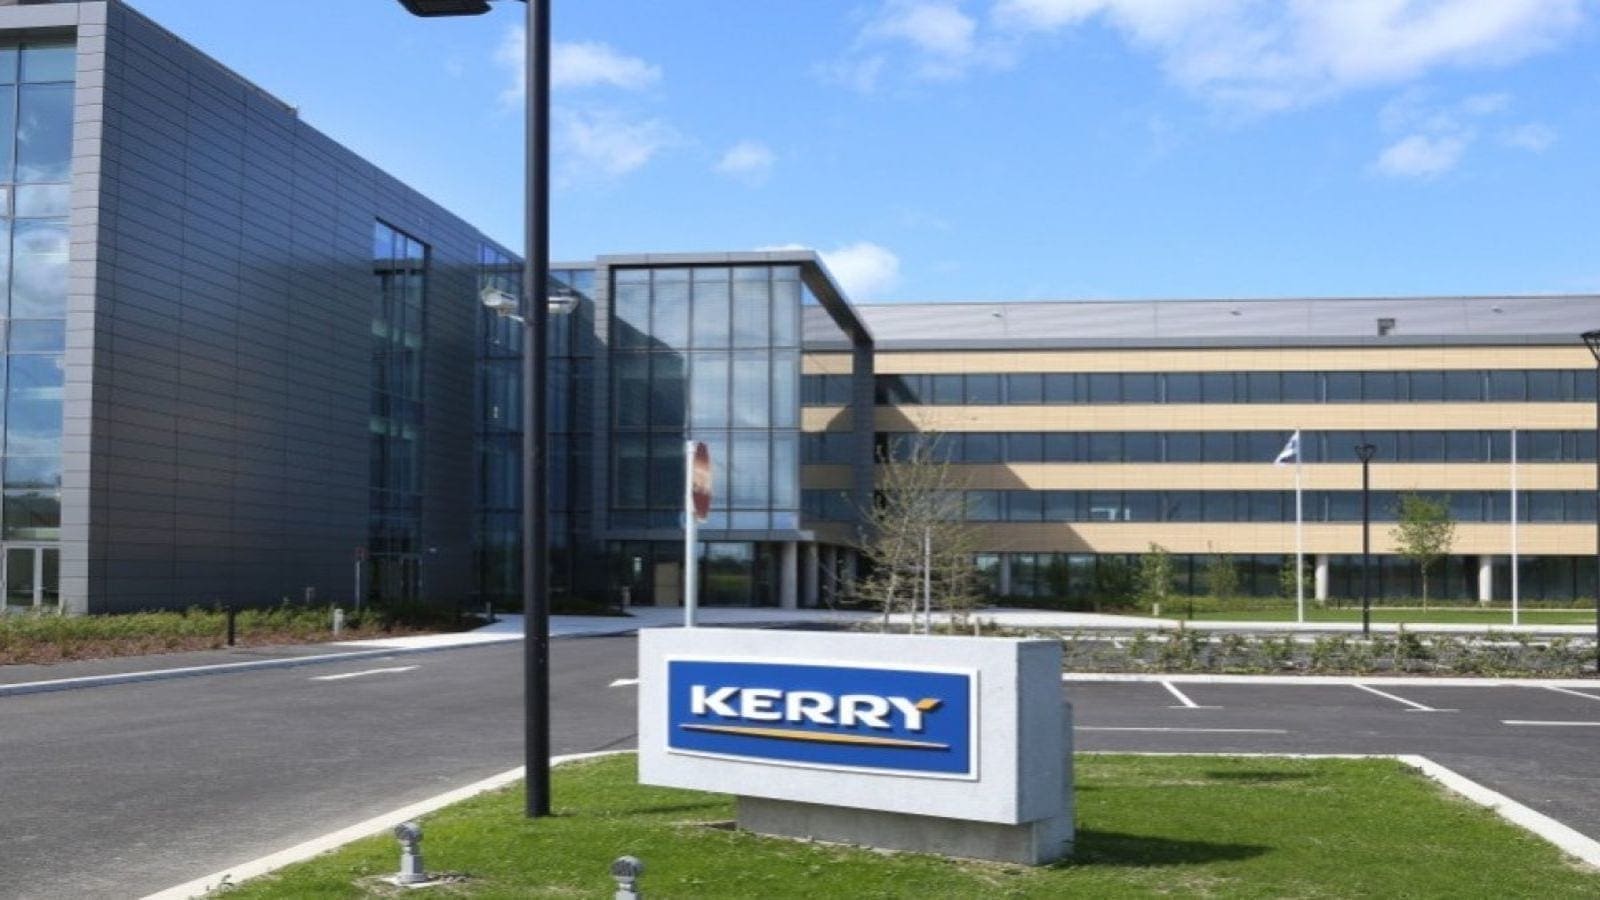 Kerry Group commits to reduce greenhouse gas emissions by 33 percent by 2030